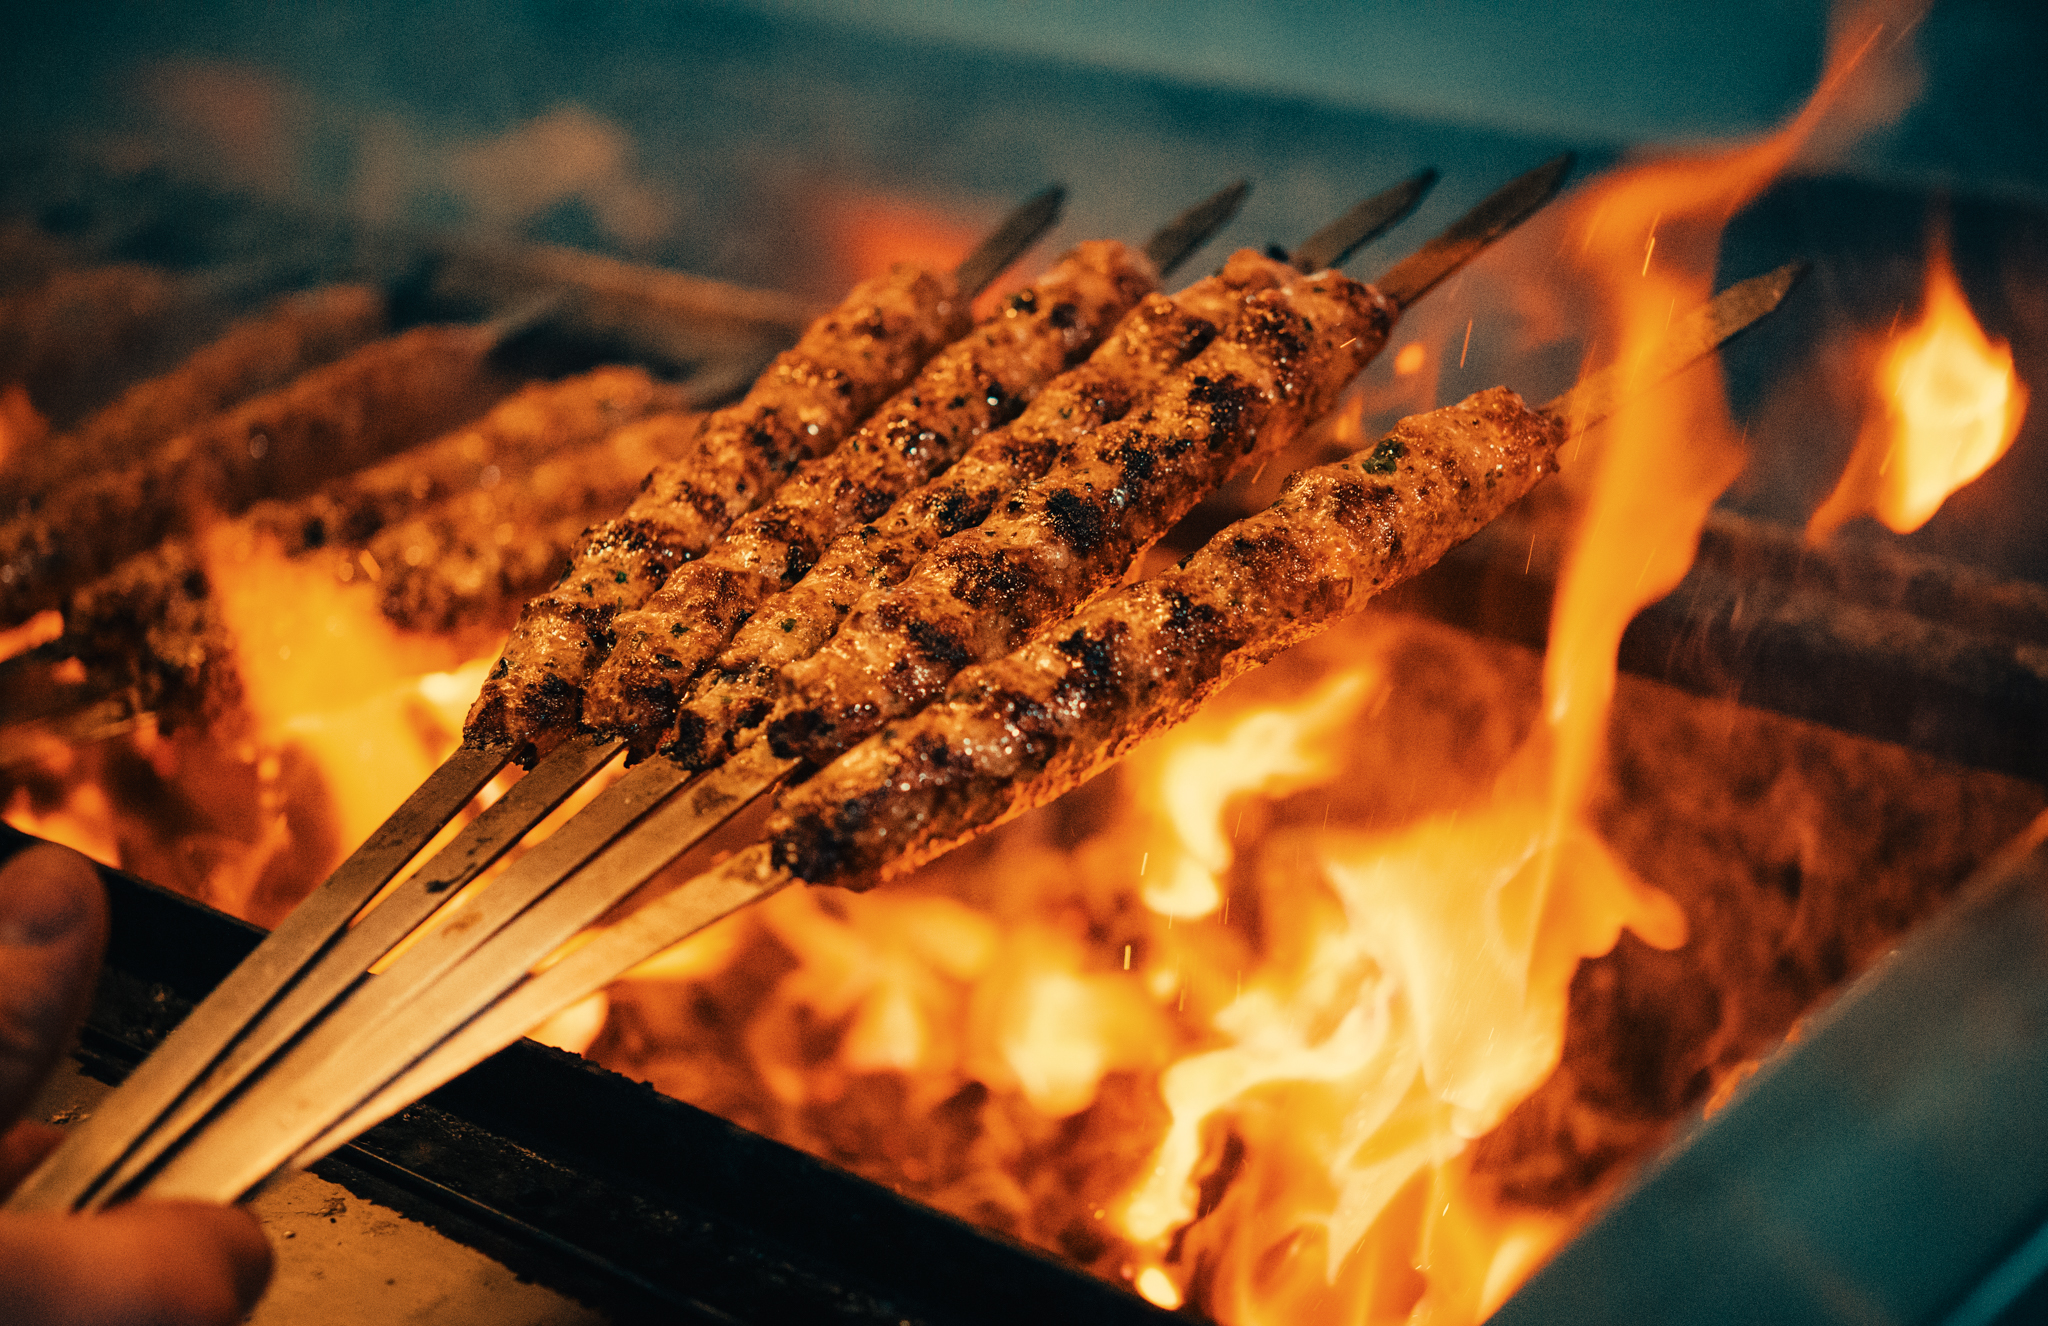 A hand holds skewers of meat over a ranging fire grill.